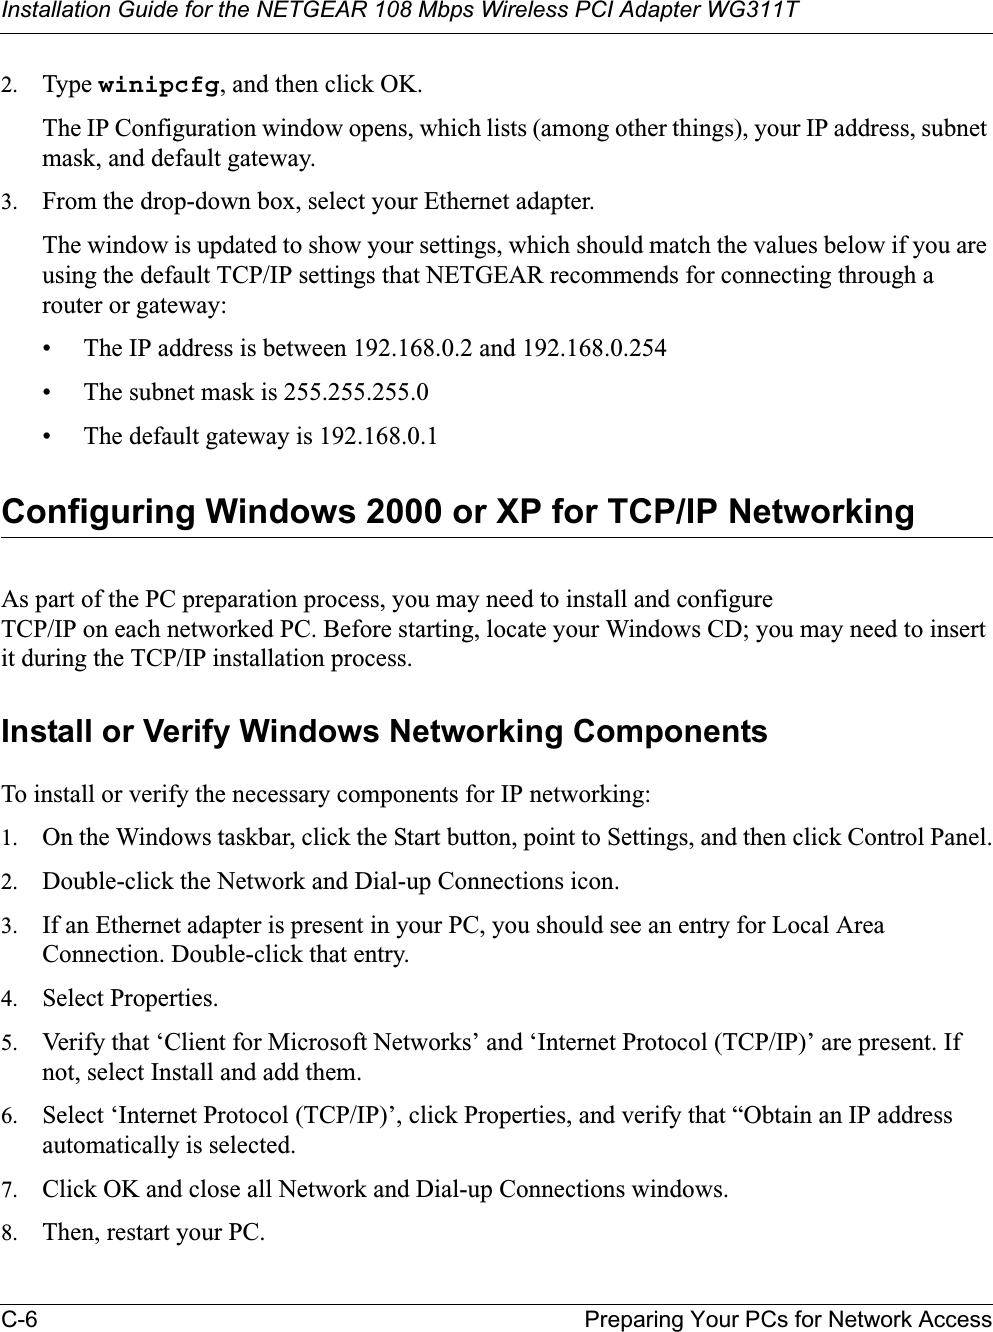 Installation Guide for the NETGEAR 108 Mbps Wireless PCI Adapter WG311TC-6 Preparing Your PCs for Network Access2. Type winipcfg, and then click OK.The IP Configuration window opens, which lists (among other things), your IP address, subnet mask, and default gateway.3. From the drop-down box, select your Ethernet adapter.The window is updated to show your settings, which should match the values below if you are using the default TCP/IP settings that NETGEAR recommends for connecting through a router or gateway:• The IP address is between 192.168.0.2 and 192.168.0.254• The subnet mask is 255.255.255.0• The default gateway is 192.168.0.1Configuring Windows 2000 or XP for TCP/IP NetworkingAs part of the PC preparation process, you may need to install and configure TCP/IP on each networked PC. Before starting, locate your Windows CD; you may need to insert it during the TCP/IP installation process.Install or Verify Windows Networking ComponentsTo install or verify the necessary components for IP networking:1. On the Windows taskbar, click the Start button, point to Settings, and then click Control Panel.2. Double-click the Network and Dial-up Connections icon.3. If an Ethernet adapter is present in your PC, you should see an entry for Local Area Connection. Double-click that entry.4. Select Properties.5. Verify that ‘Client for Microsoft Networks’ and ‘Internet Protocol (TCP/IP)’ are present. If not, select Install and add them.6. Select ‘Internet Protocol (TCP/IP)’, click Properties, and verify that “Obtain an IP address automatically is selected.7. Click OK and close all Network and Dial-up Connections windows.8. Then, restart your PC.